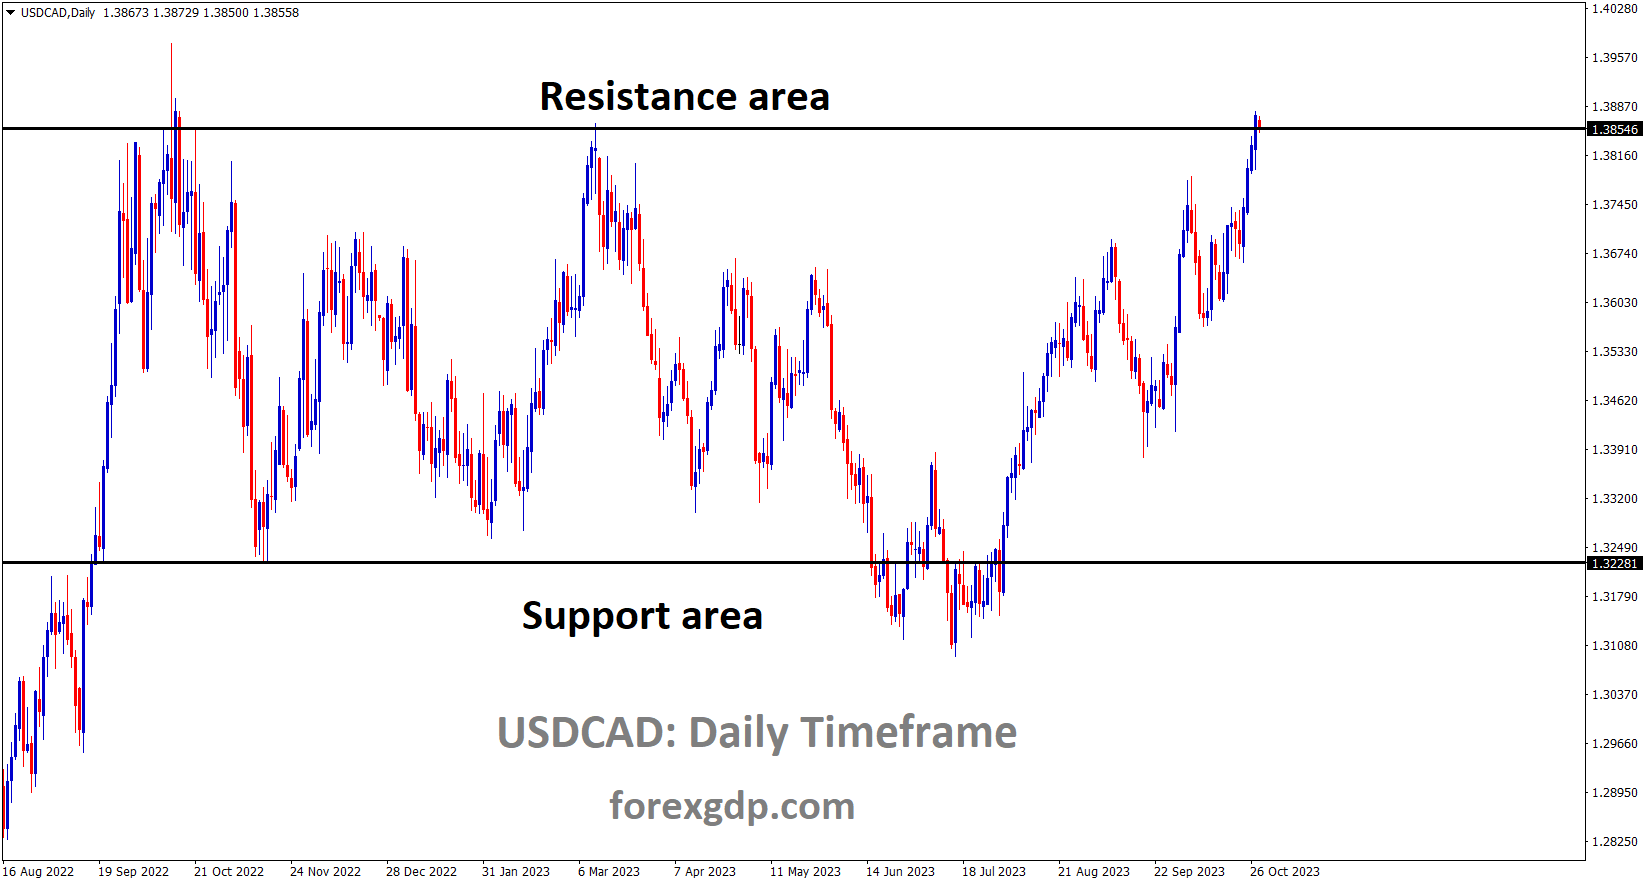 USDCAD is moving in the Box pattern and the market has reached the resistance area of the pattern